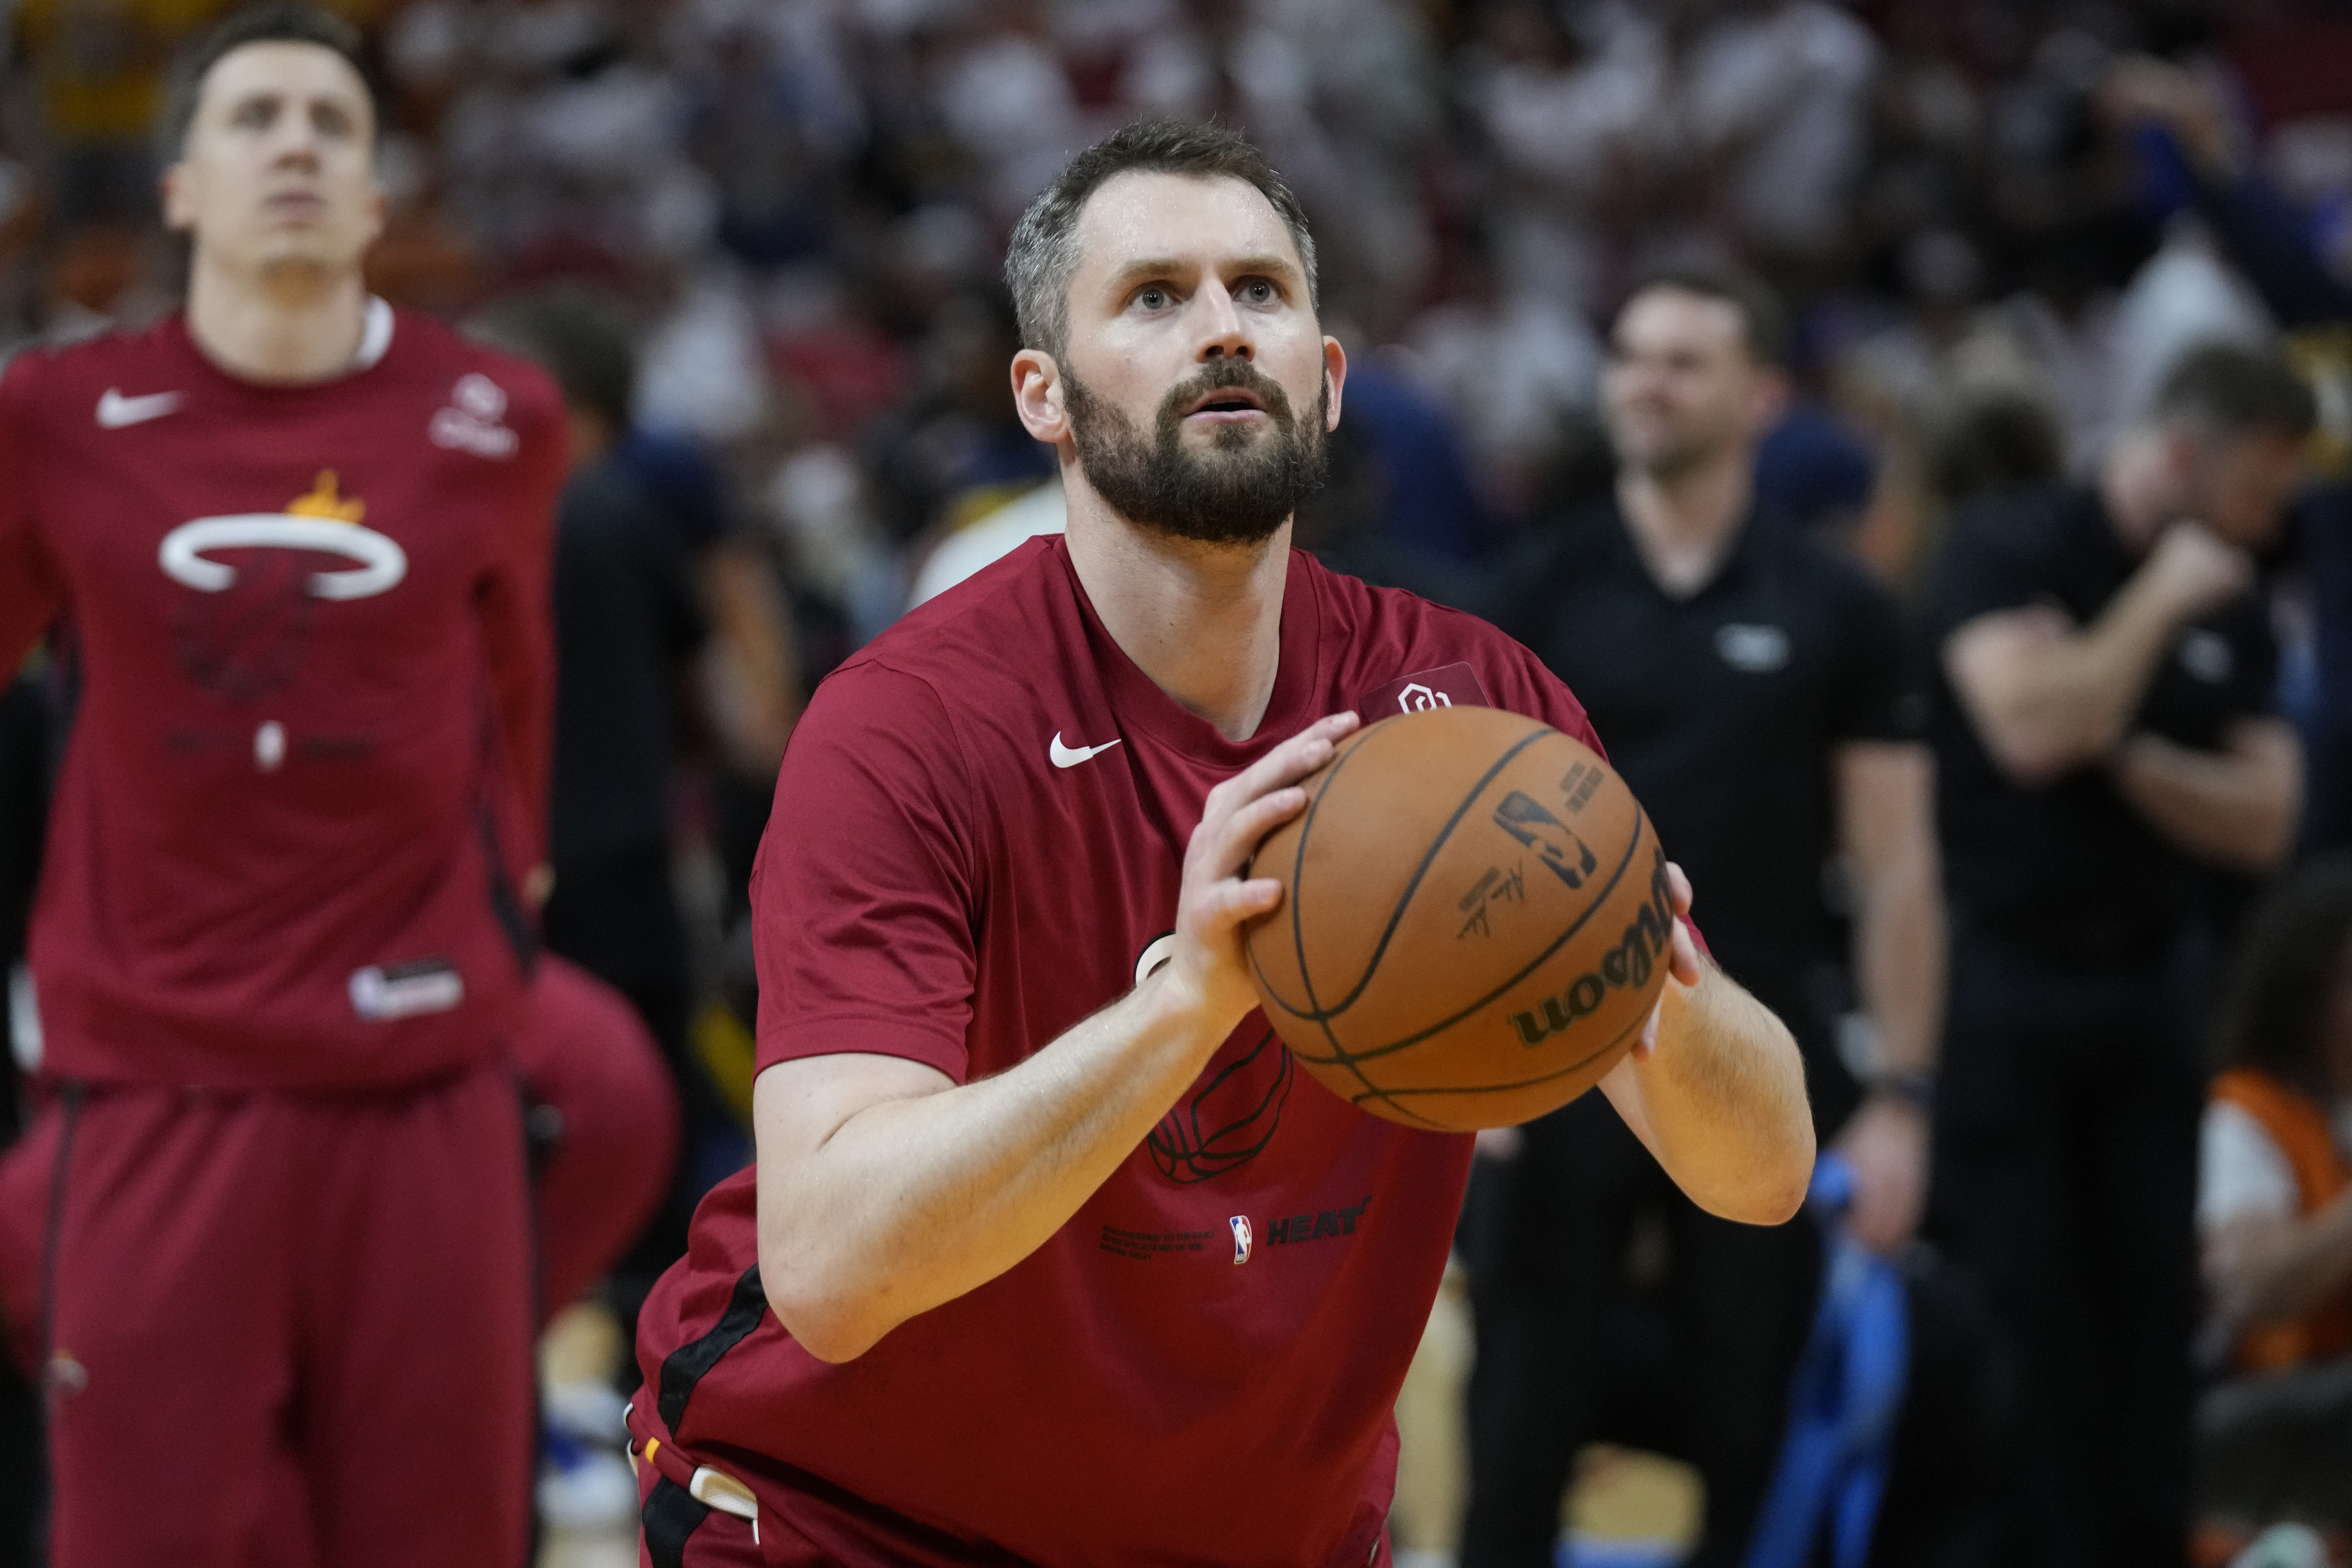 Kevin Love settling in, trying to lift struggling Miami Heat